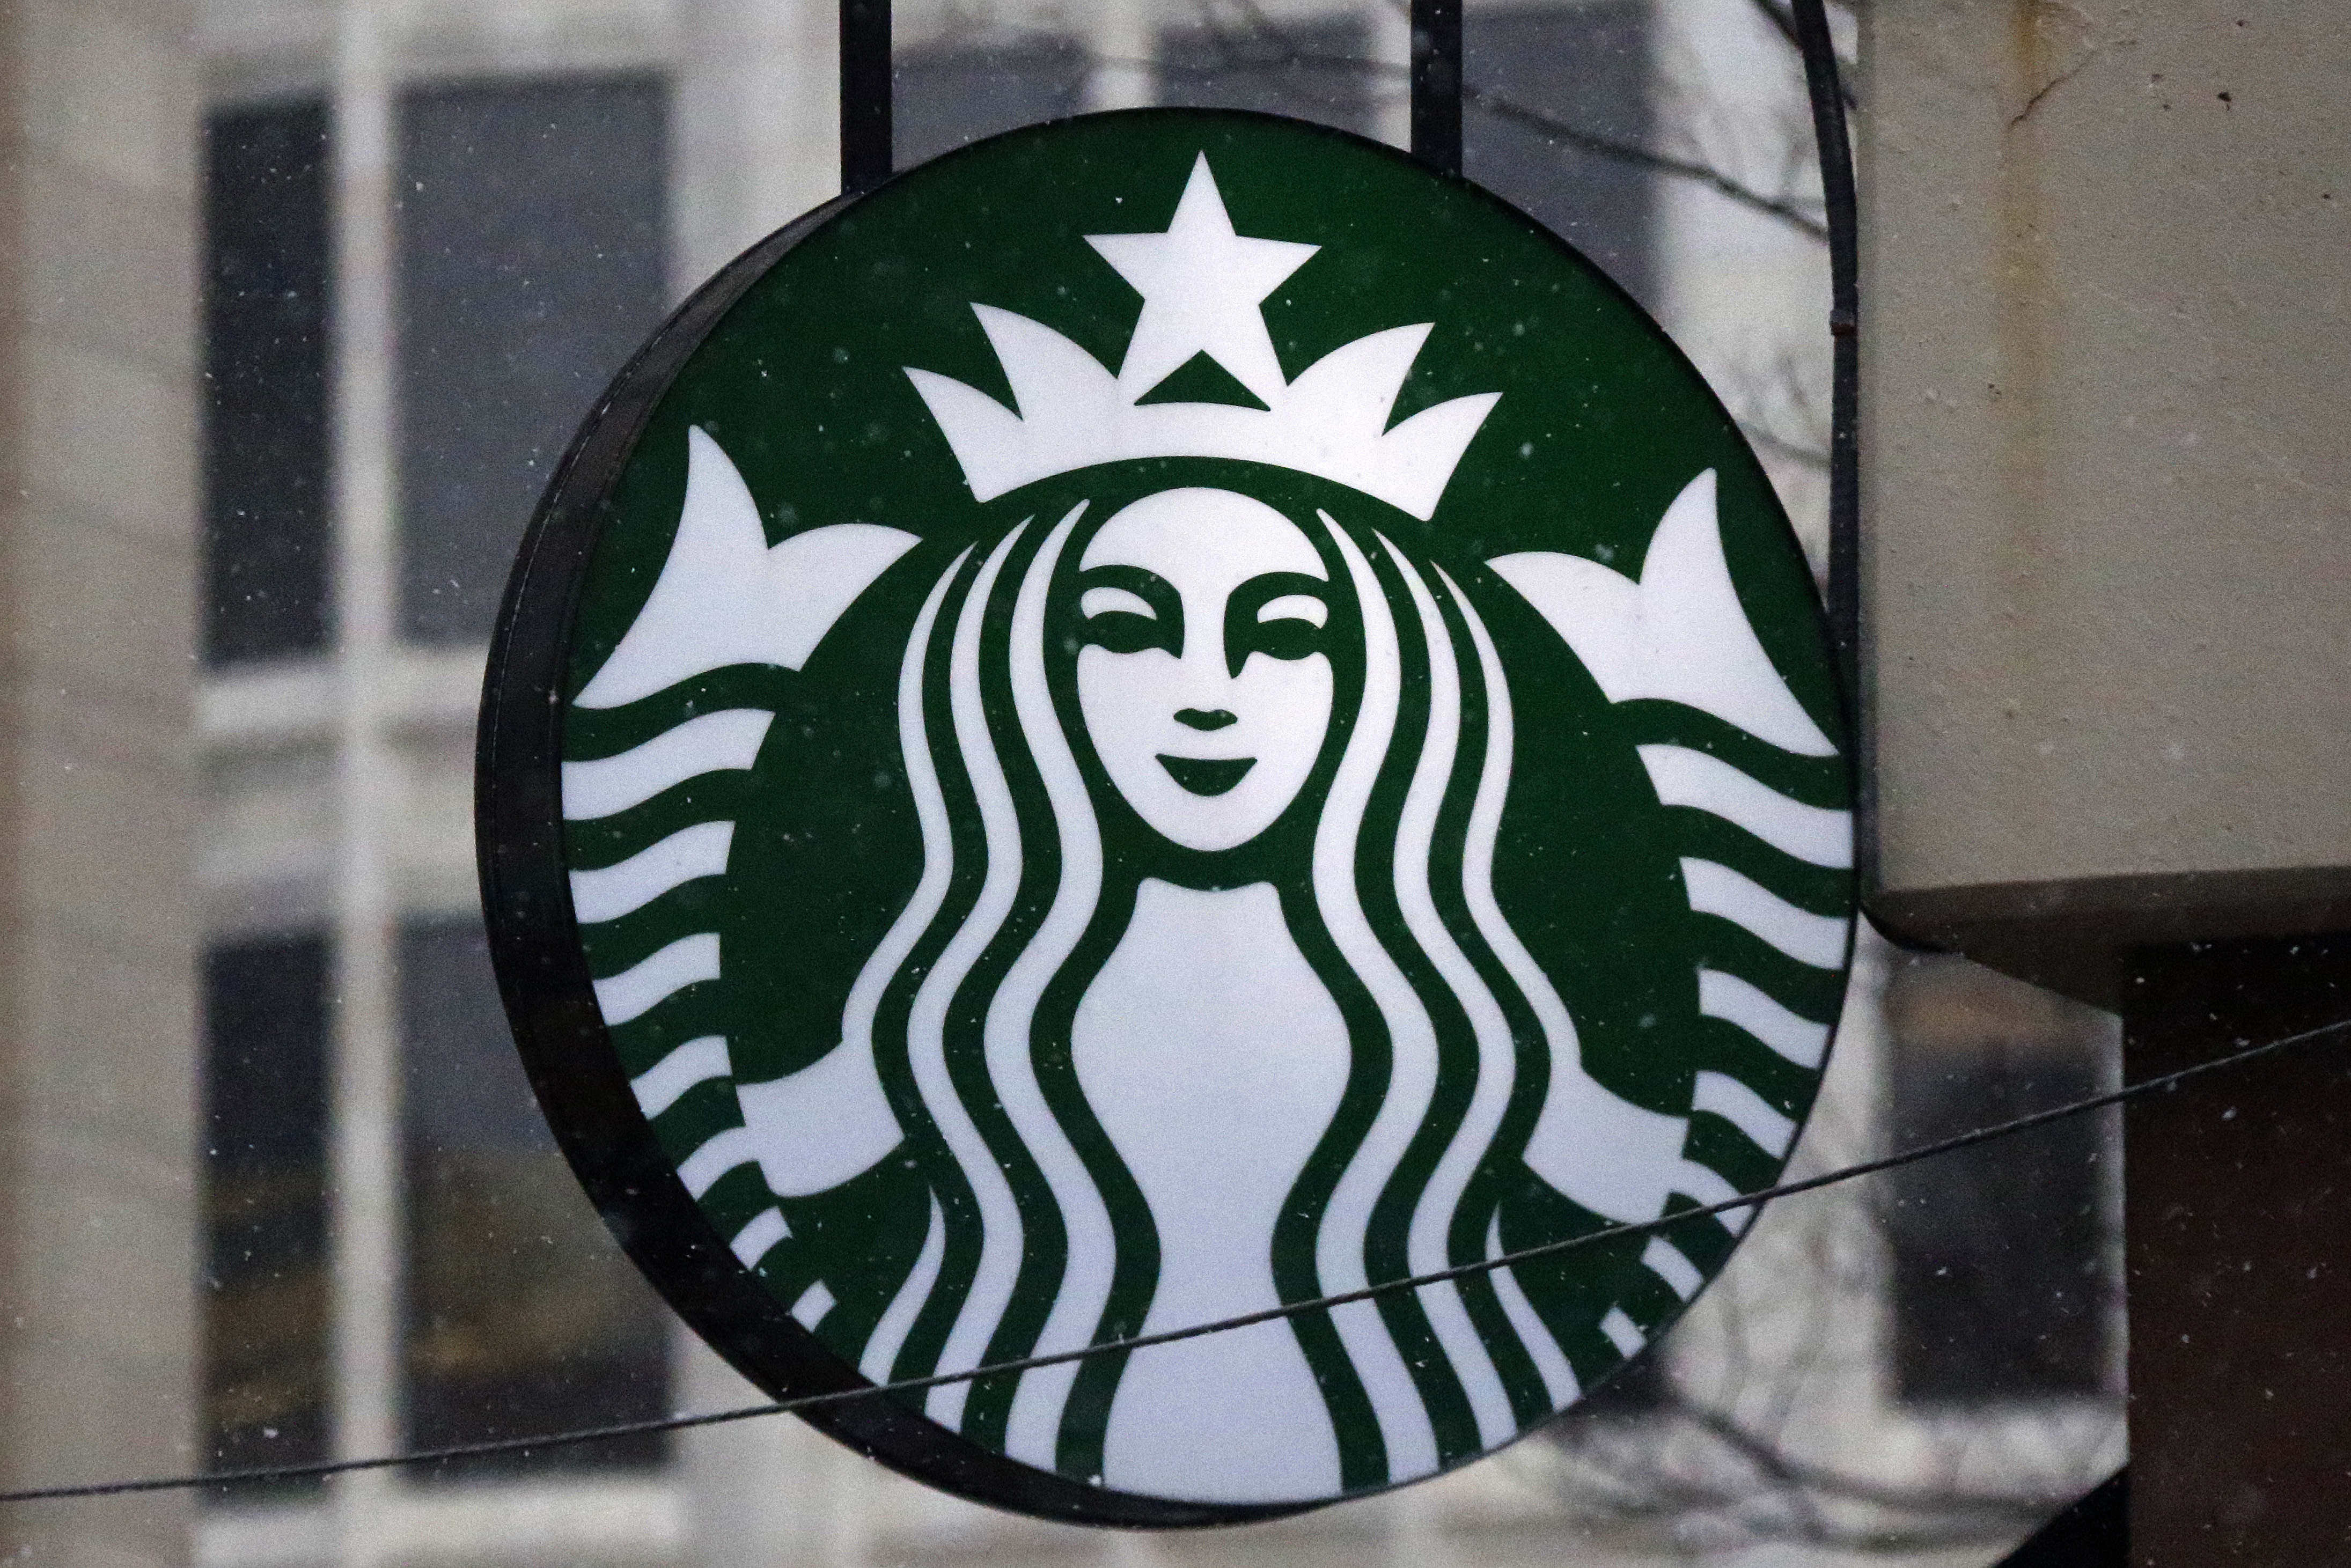 Pumpkin spice helps Starbucks posts record sales, but growth may